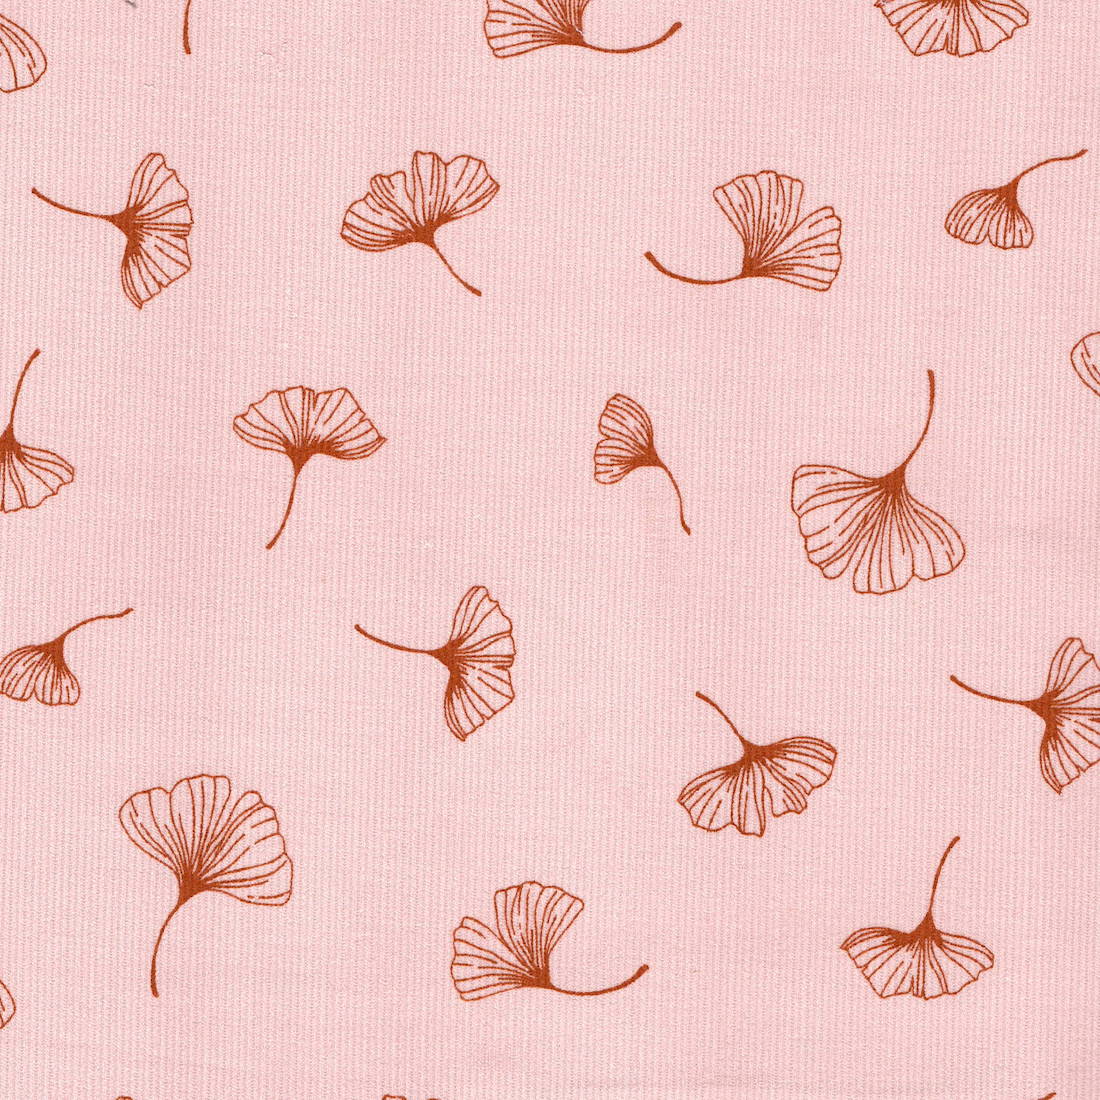 babycord needlecord 21 Wale Ginko Fabric in Pale Pink